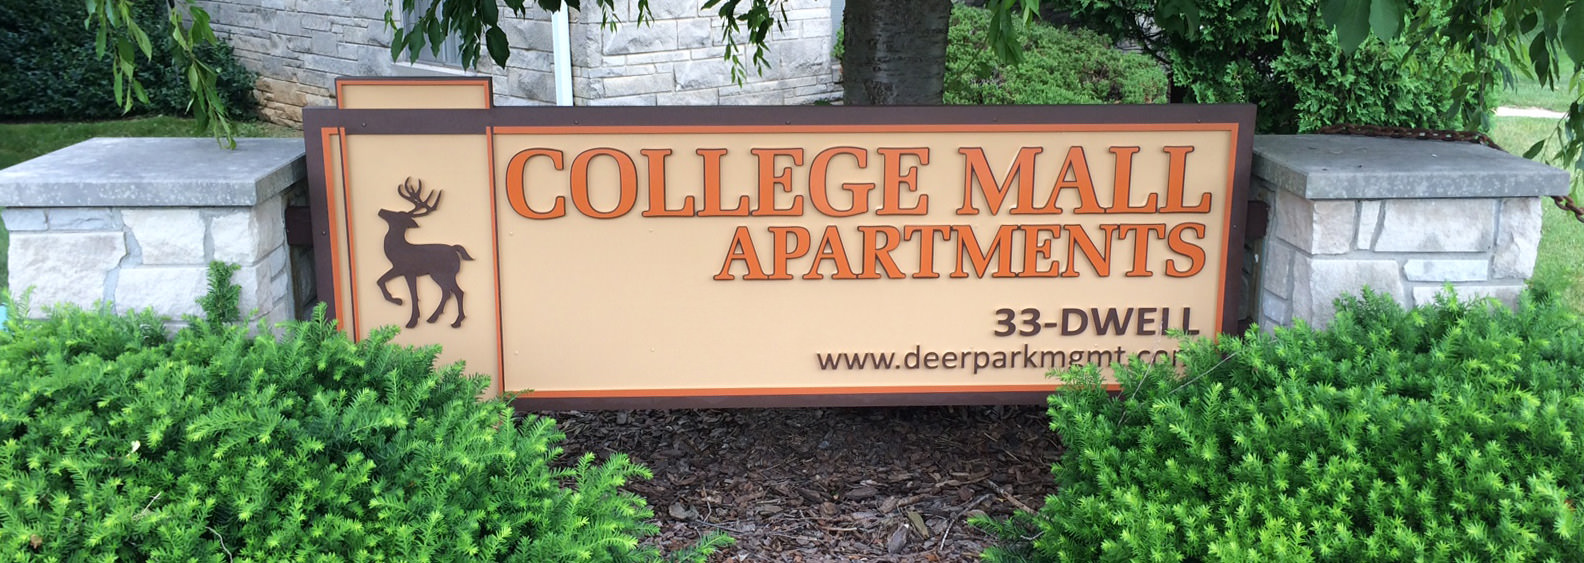 routed-sign-college-mall-apartments